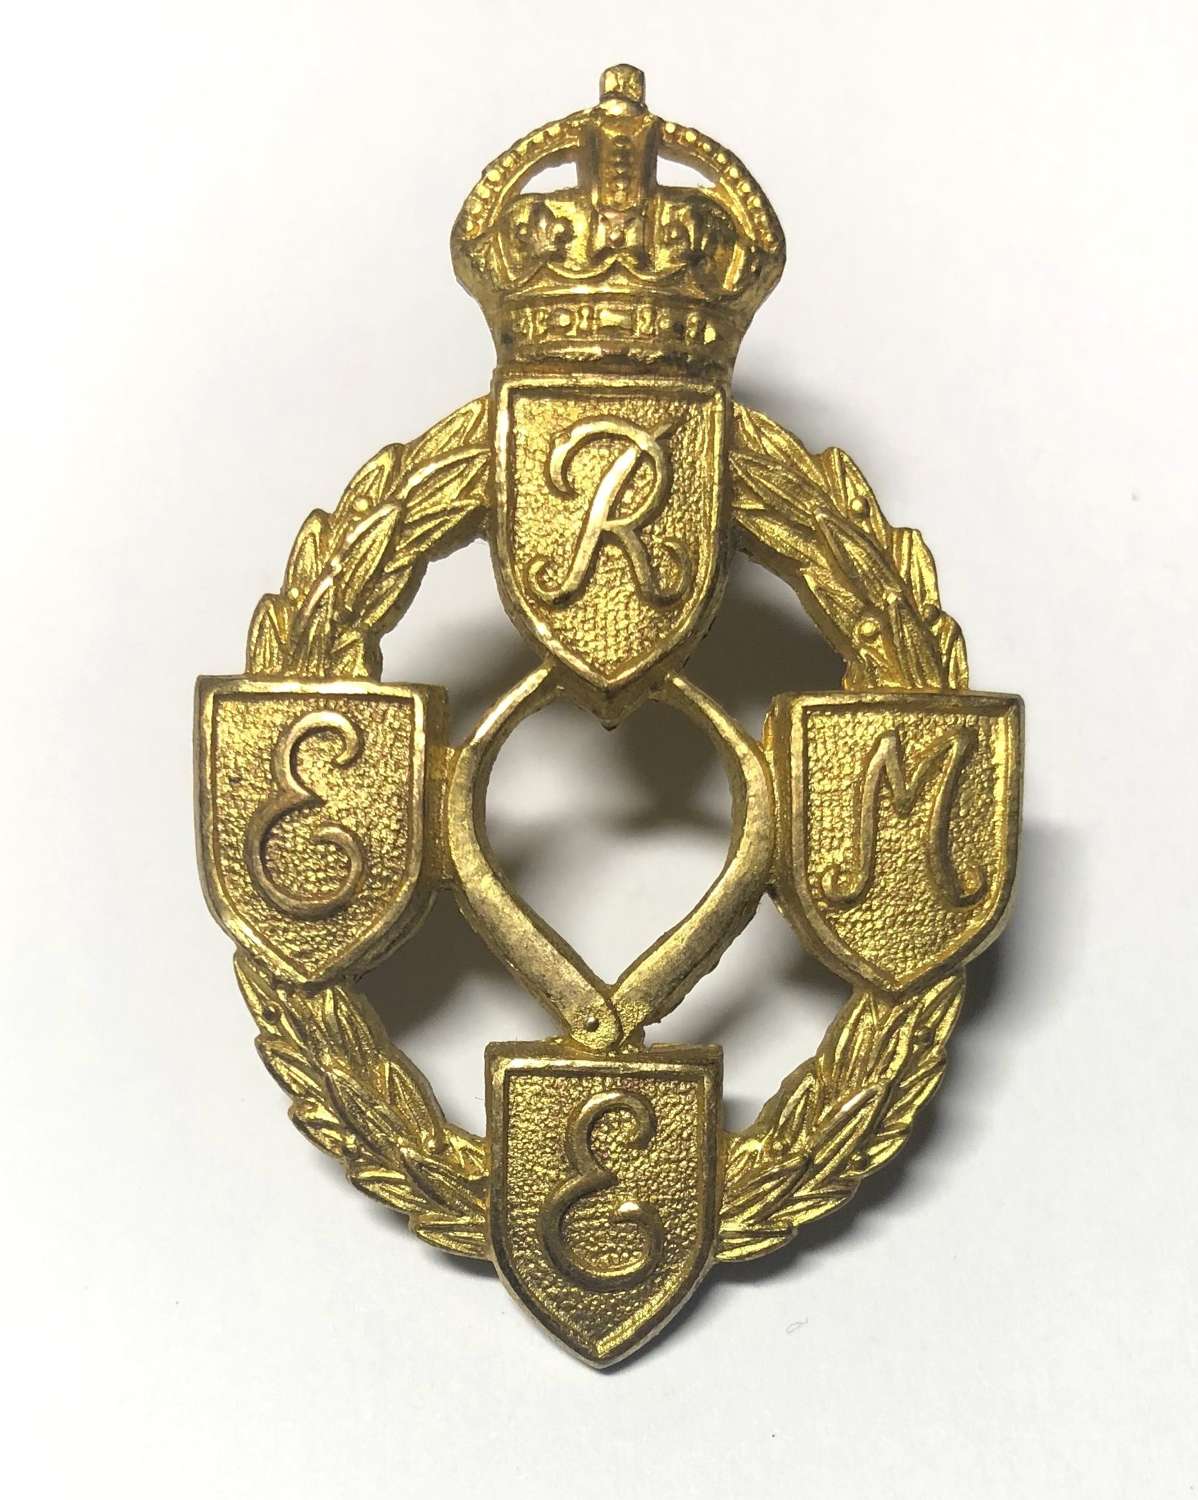 REME WW2 gilt Officer cap badge by Ludlow, London